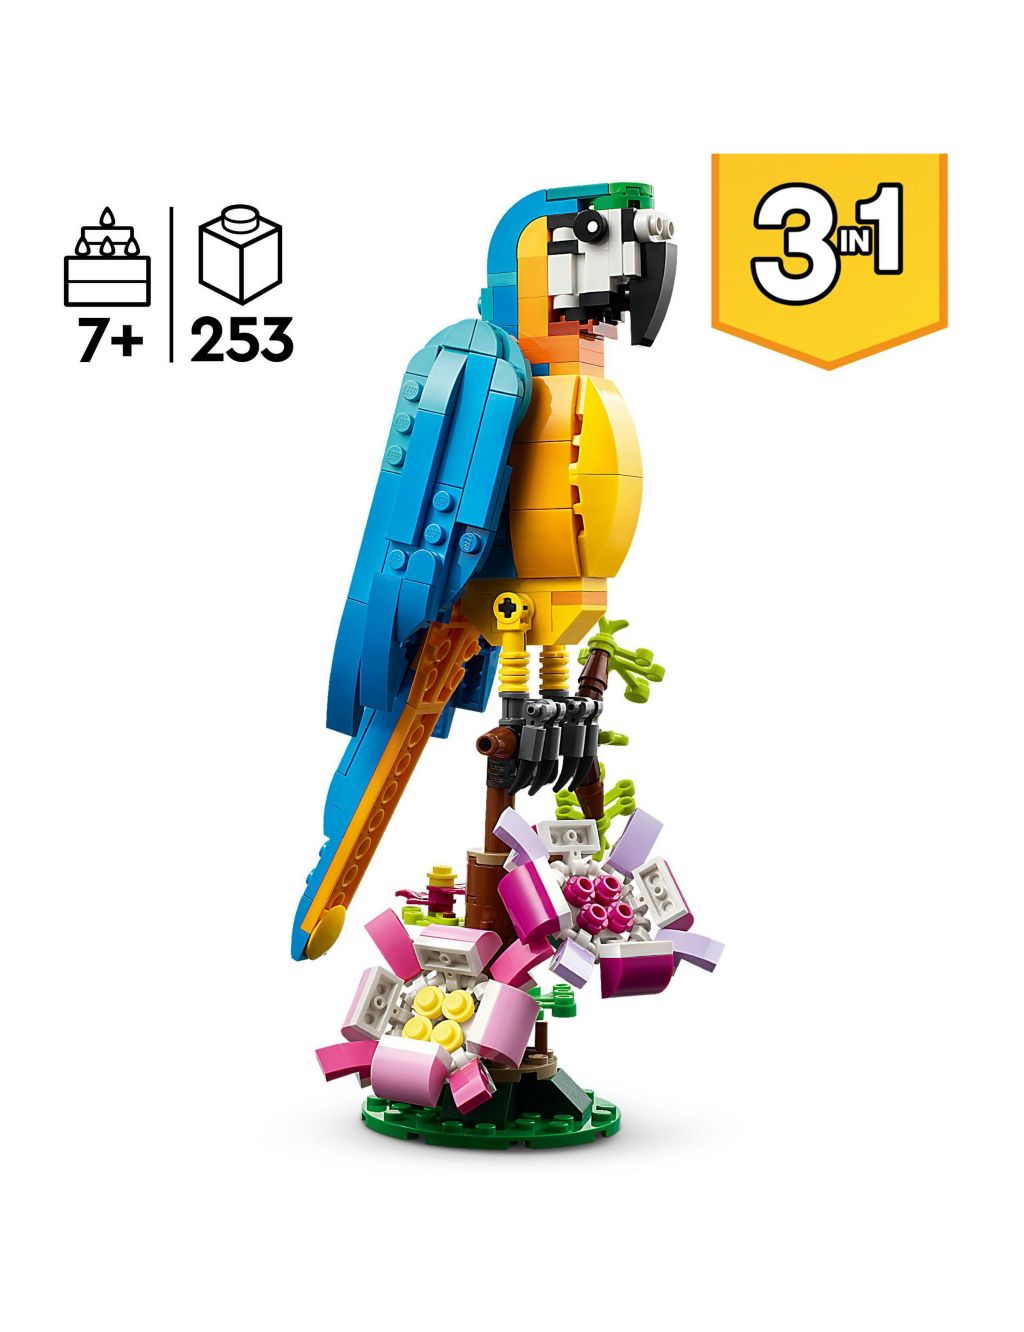 LEGO Creator 3 in 1 Exotic Parrot Toy Set (7+ Yrs) image 2